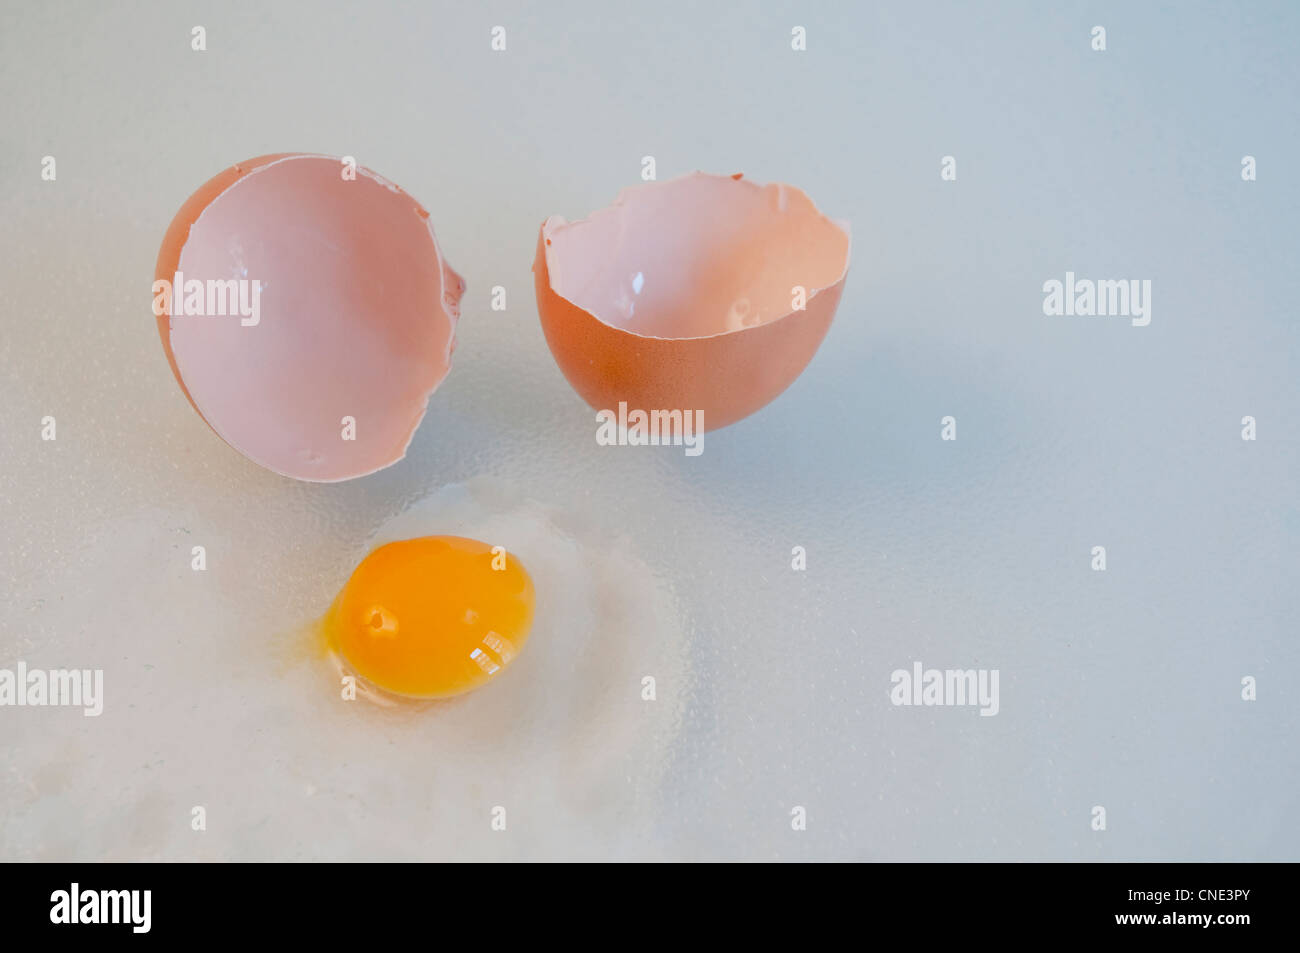 Cracked egg with a small yolk. Stock Photo